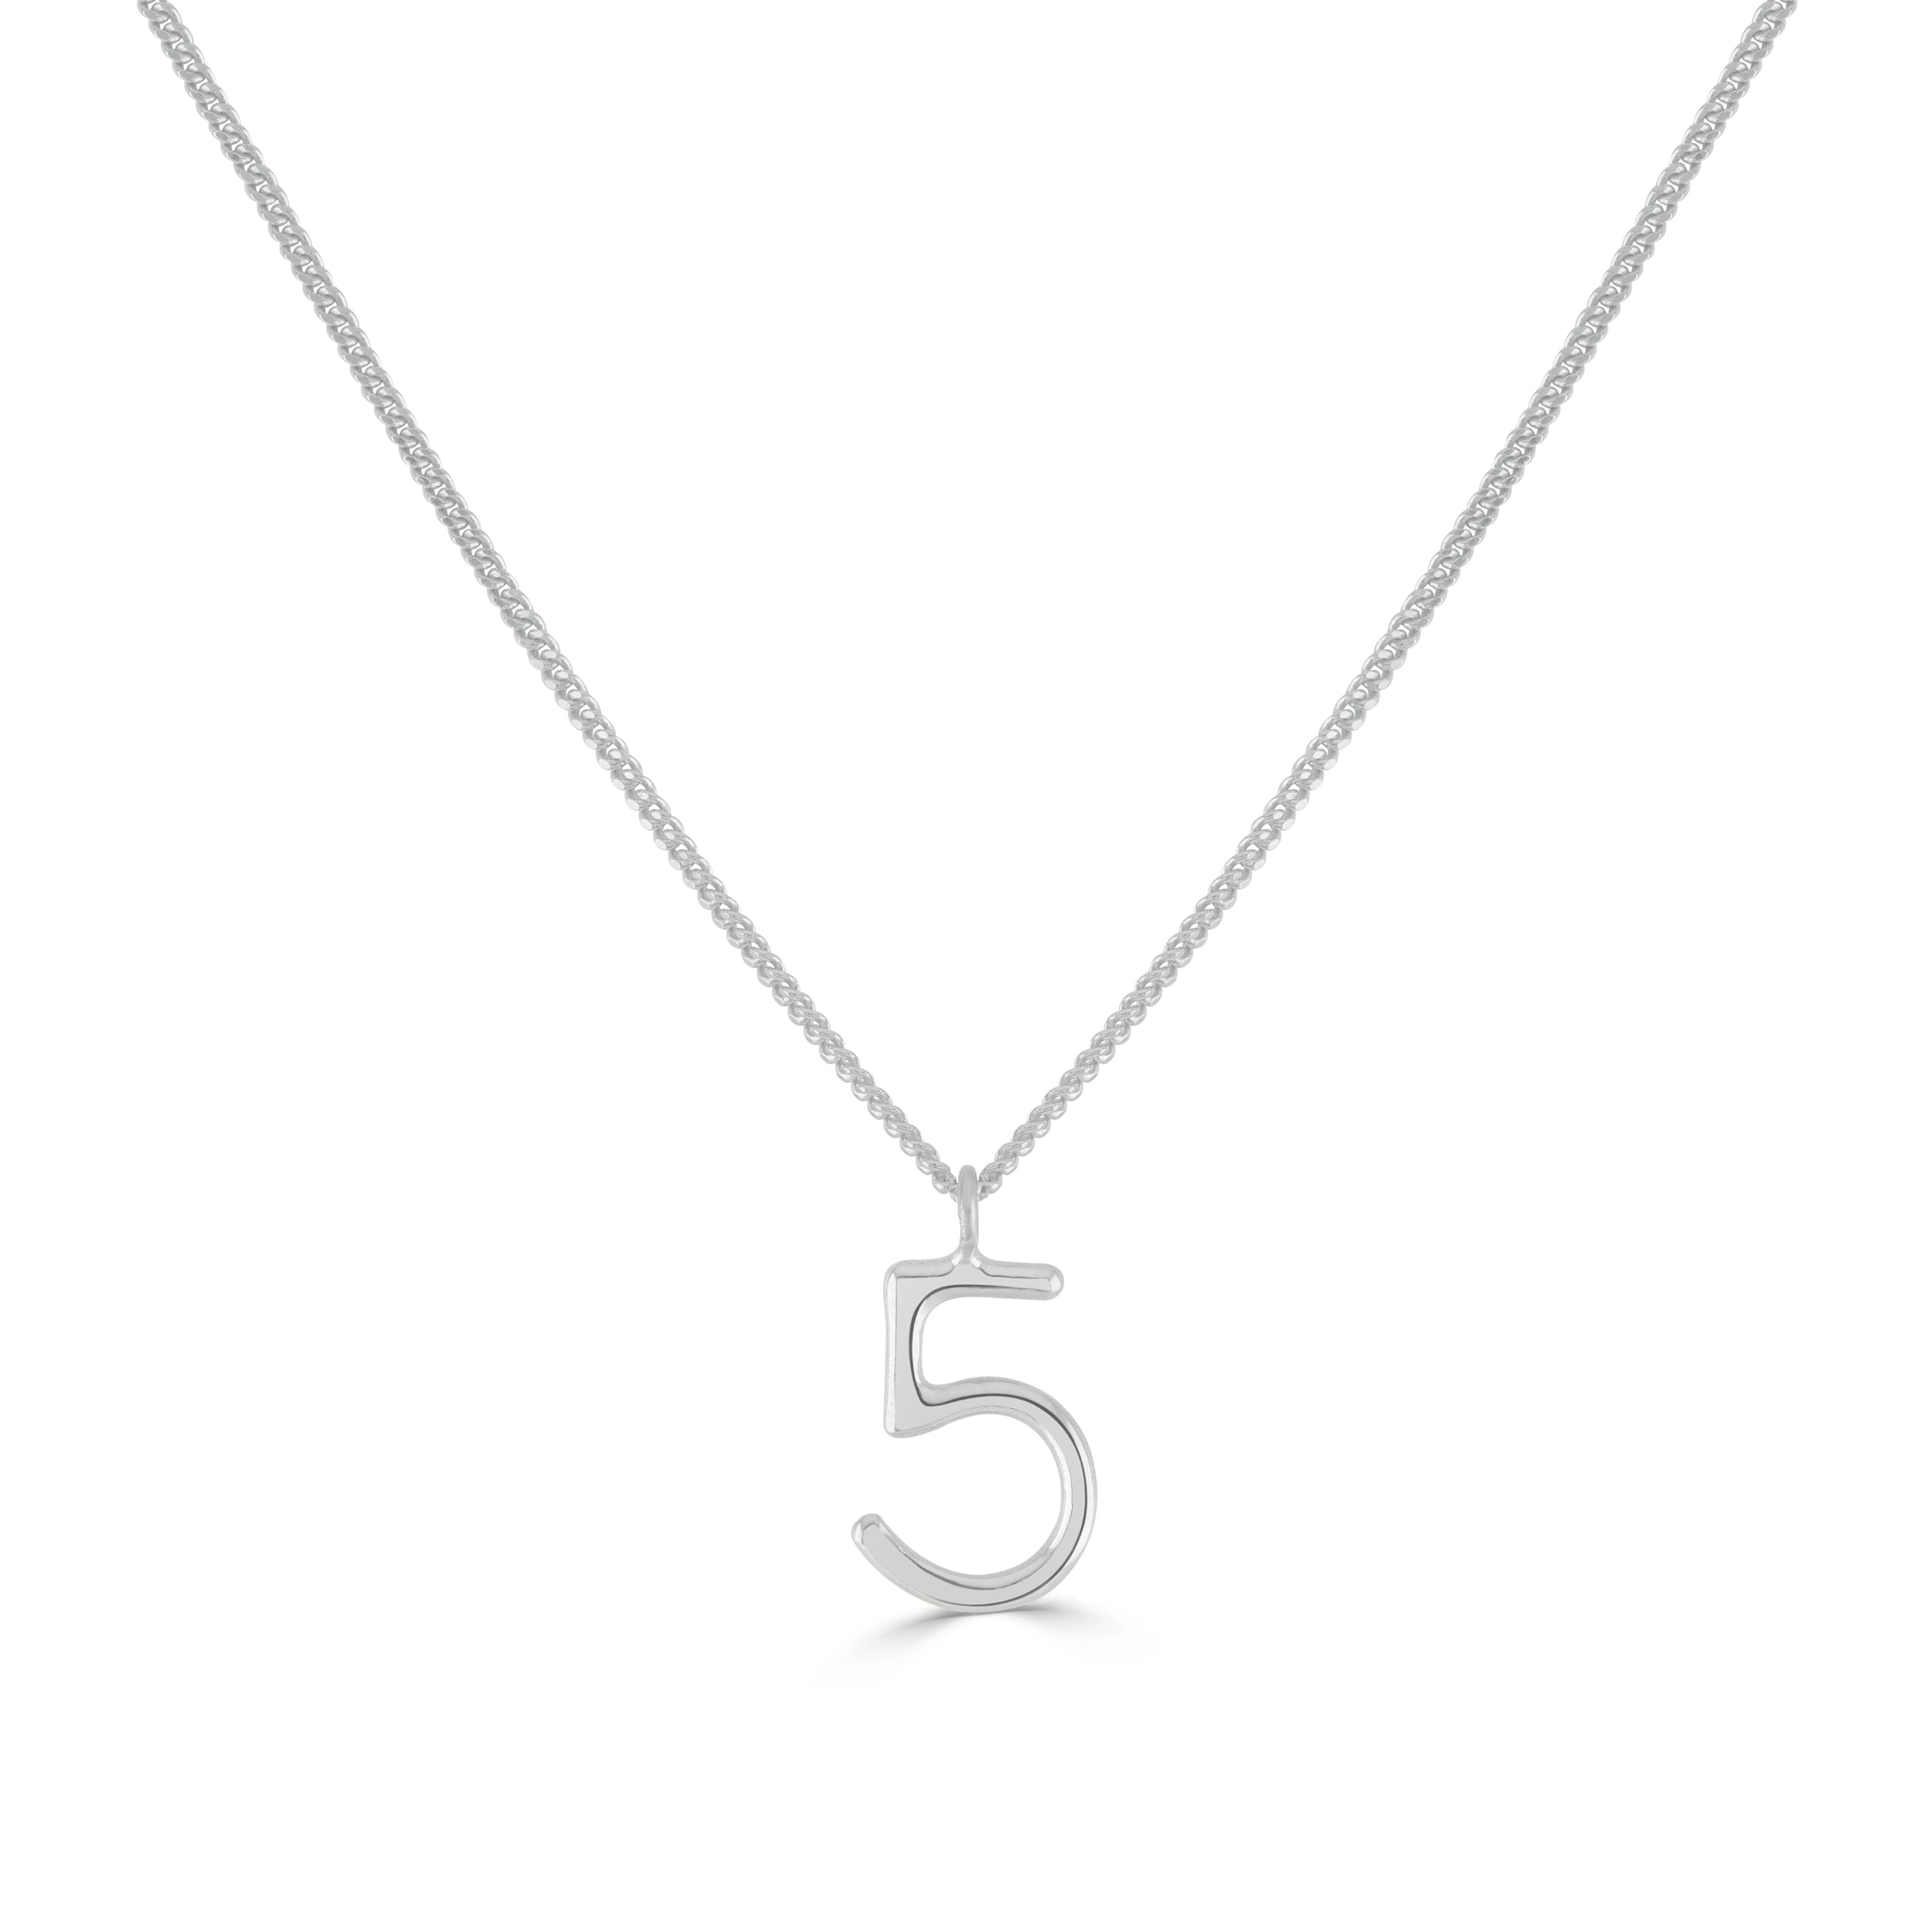 Silver Number 5 Necklace